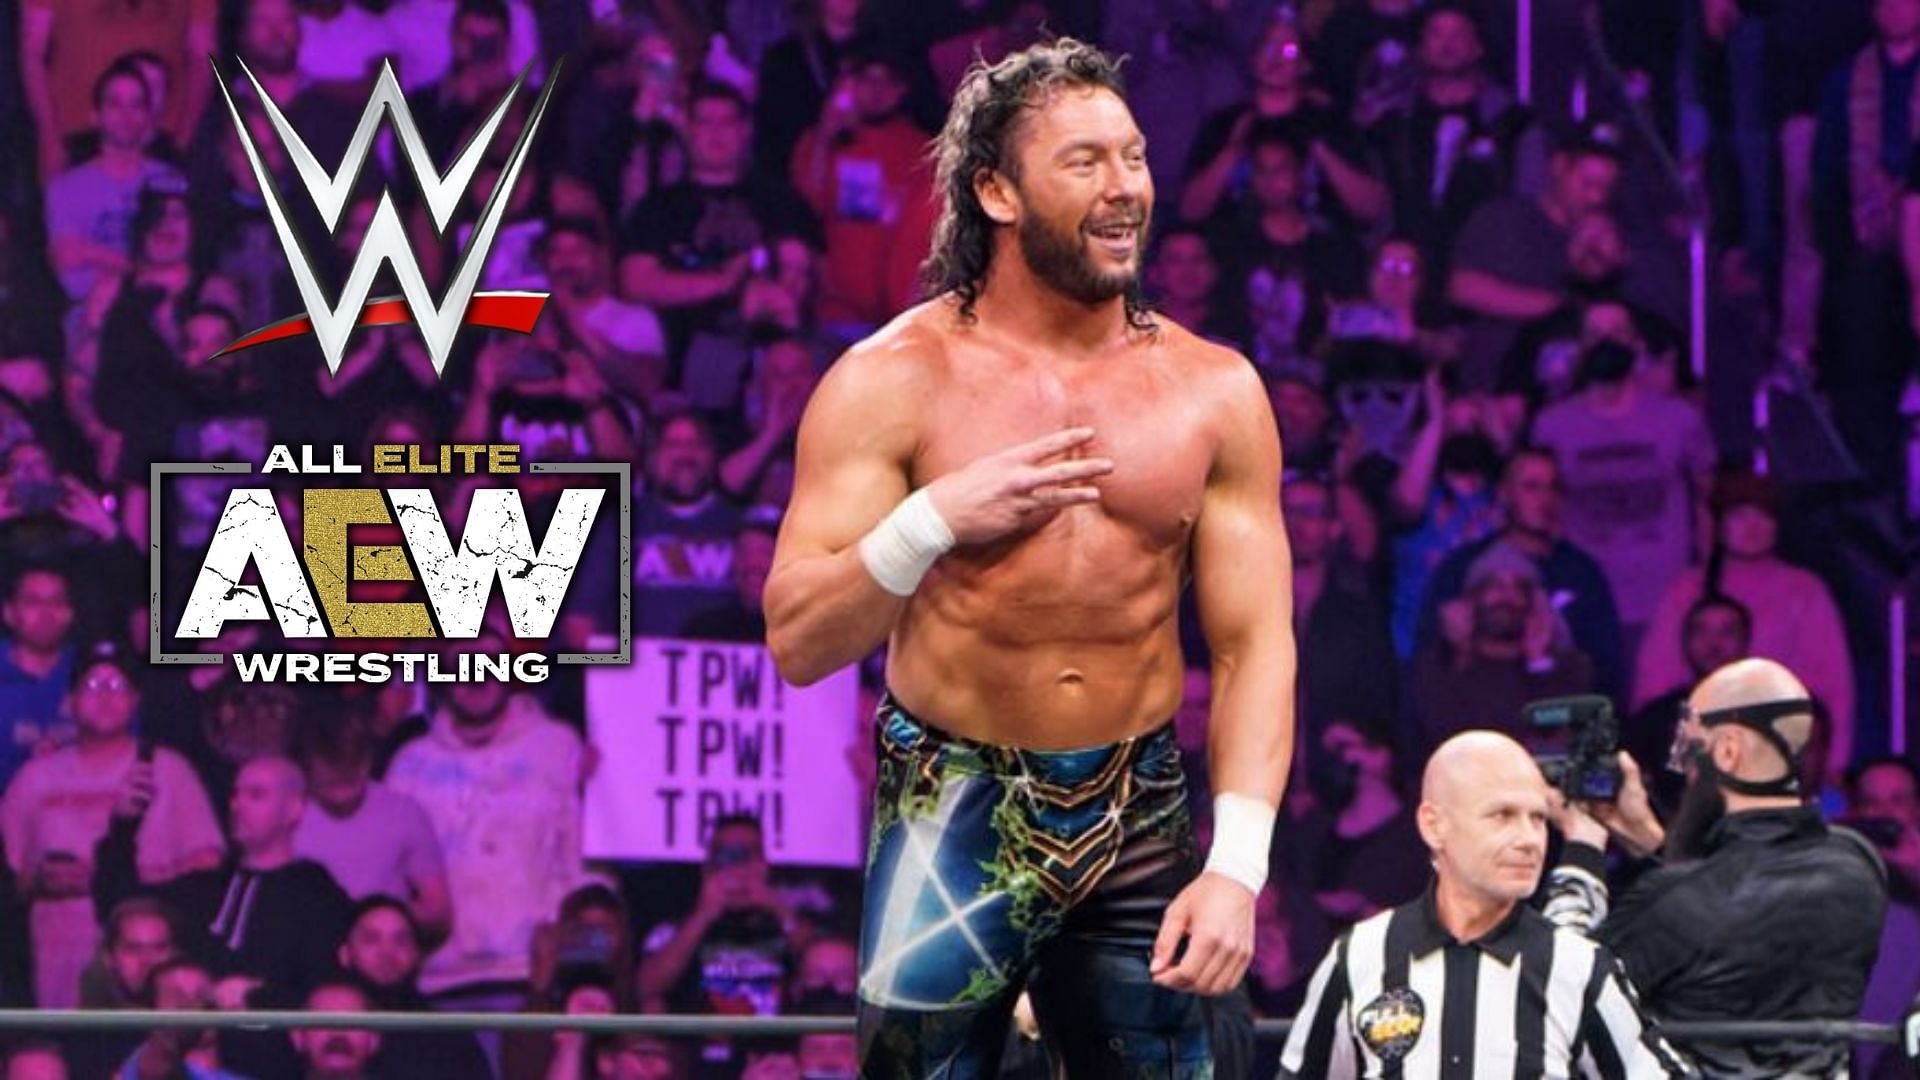 Kenny Omega was praised by a WWE Hall of Famer.